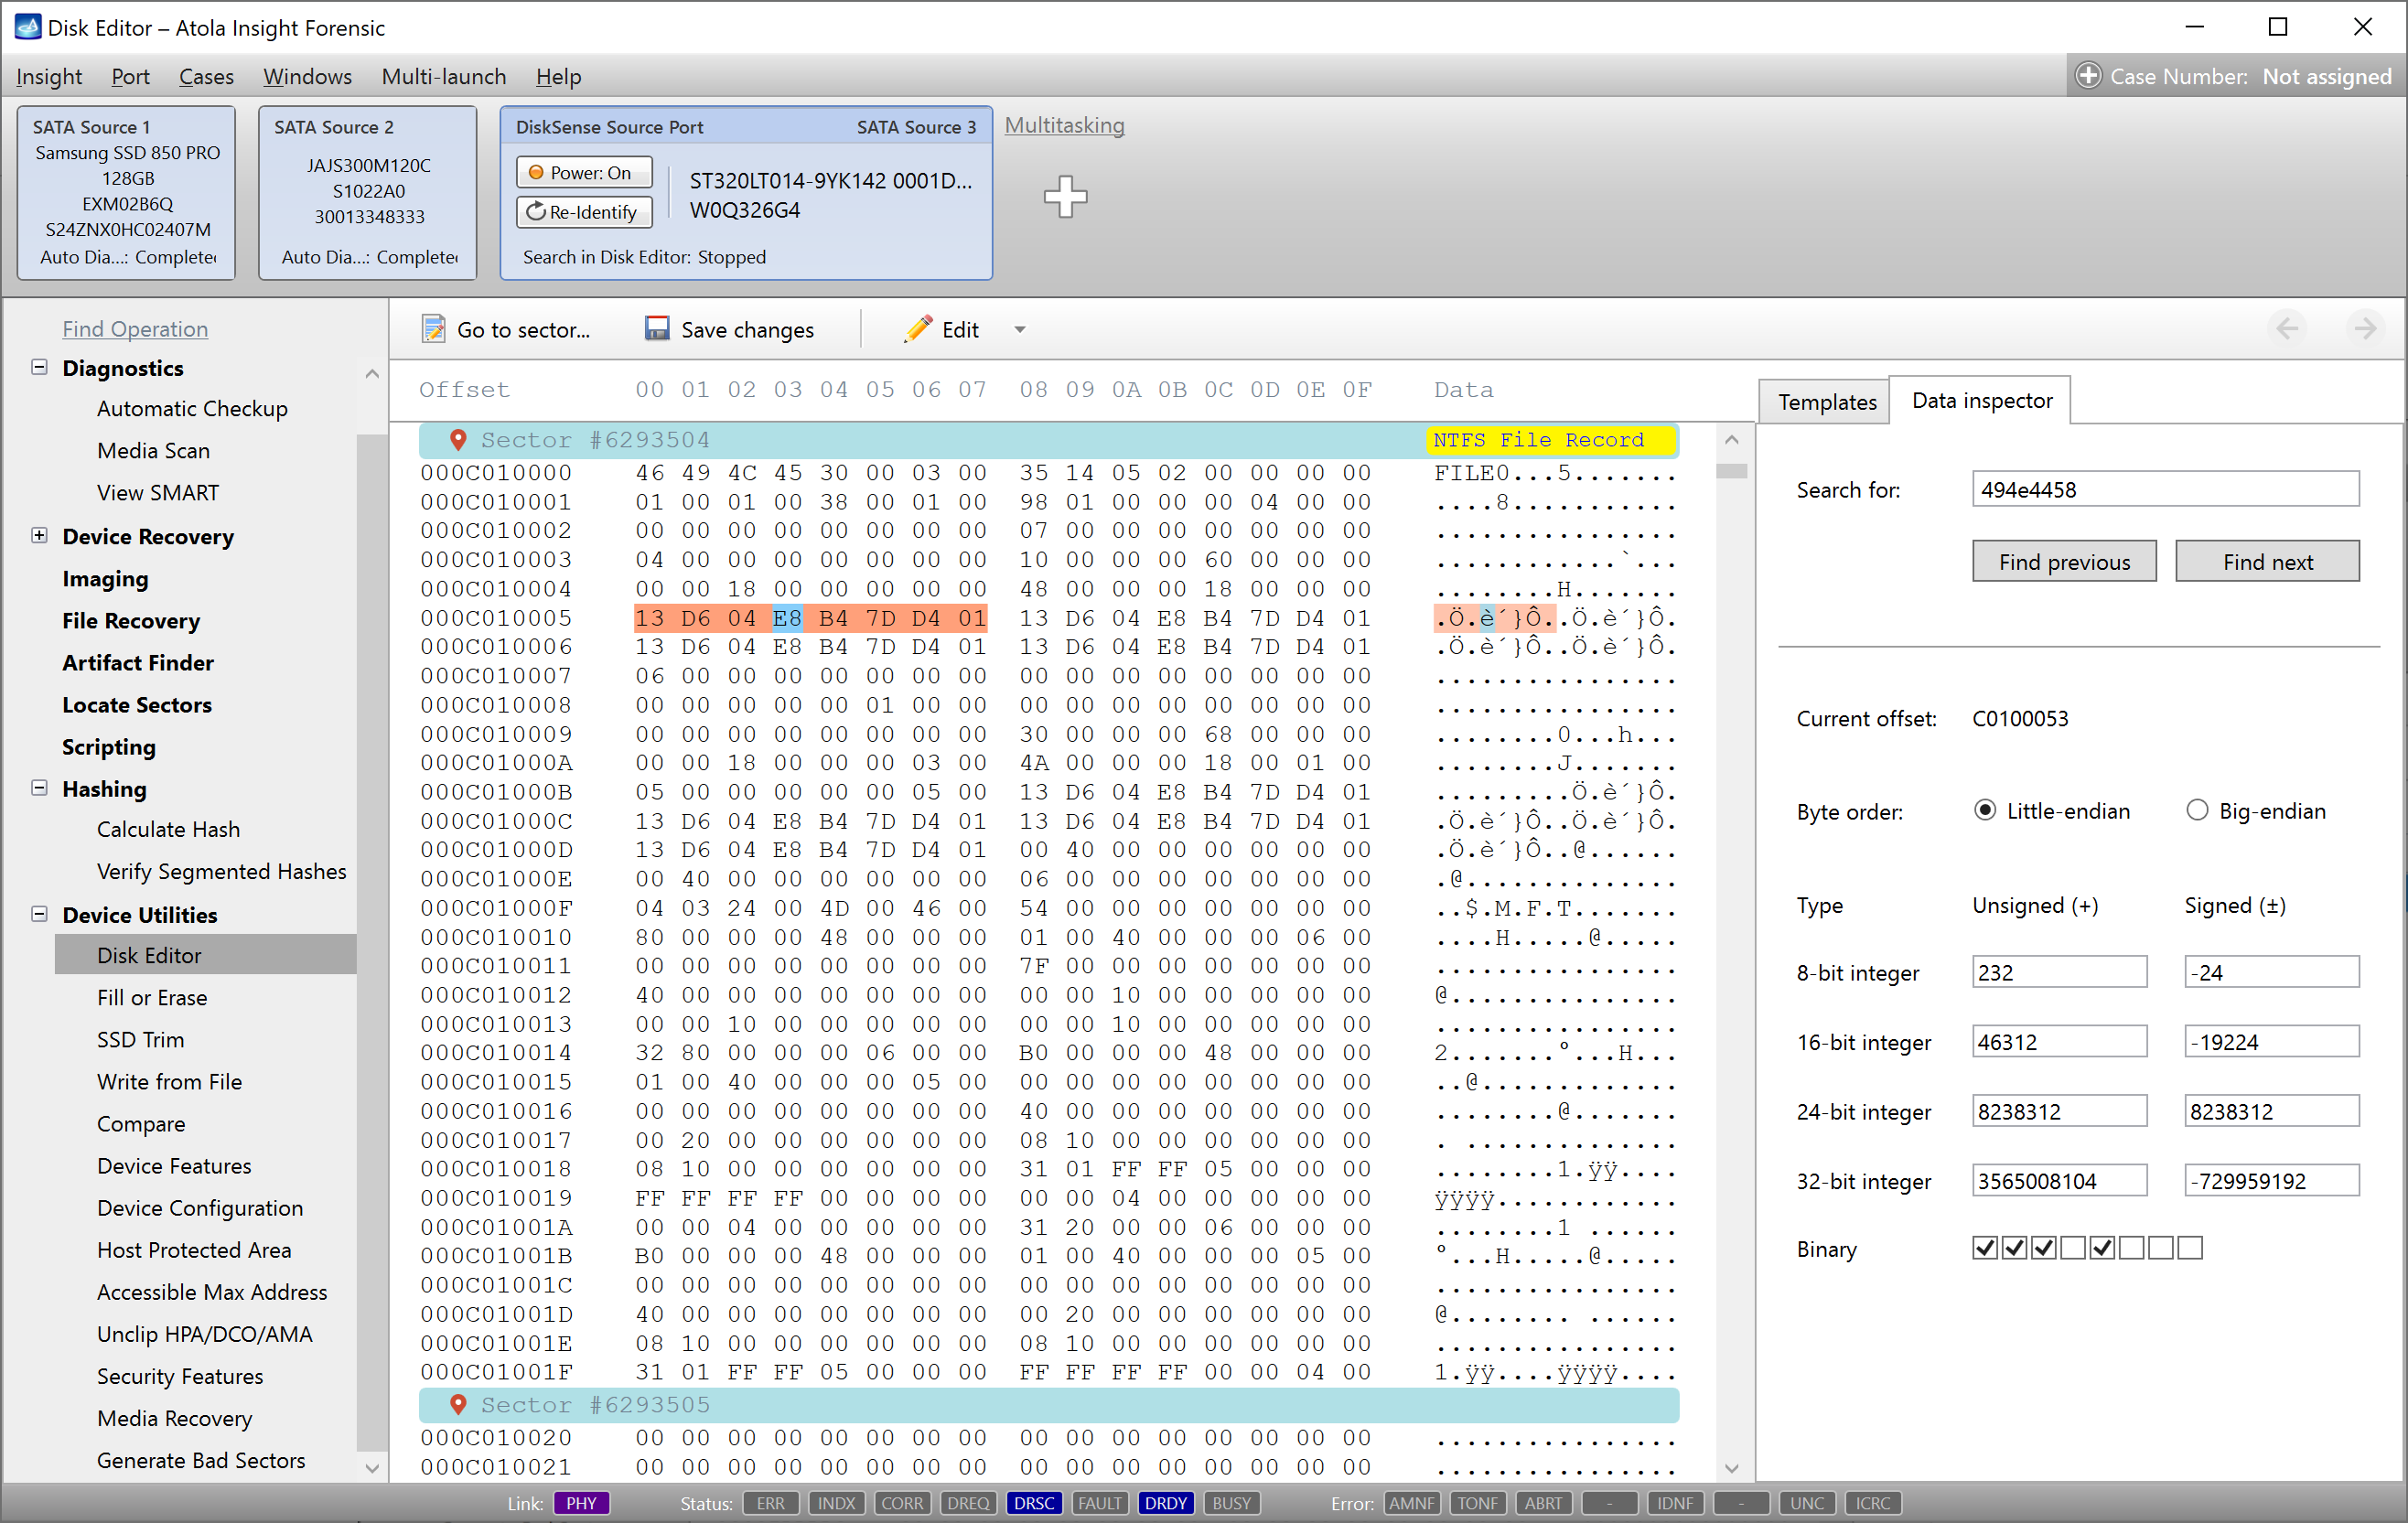 Data inspector tab in the Disk editor.